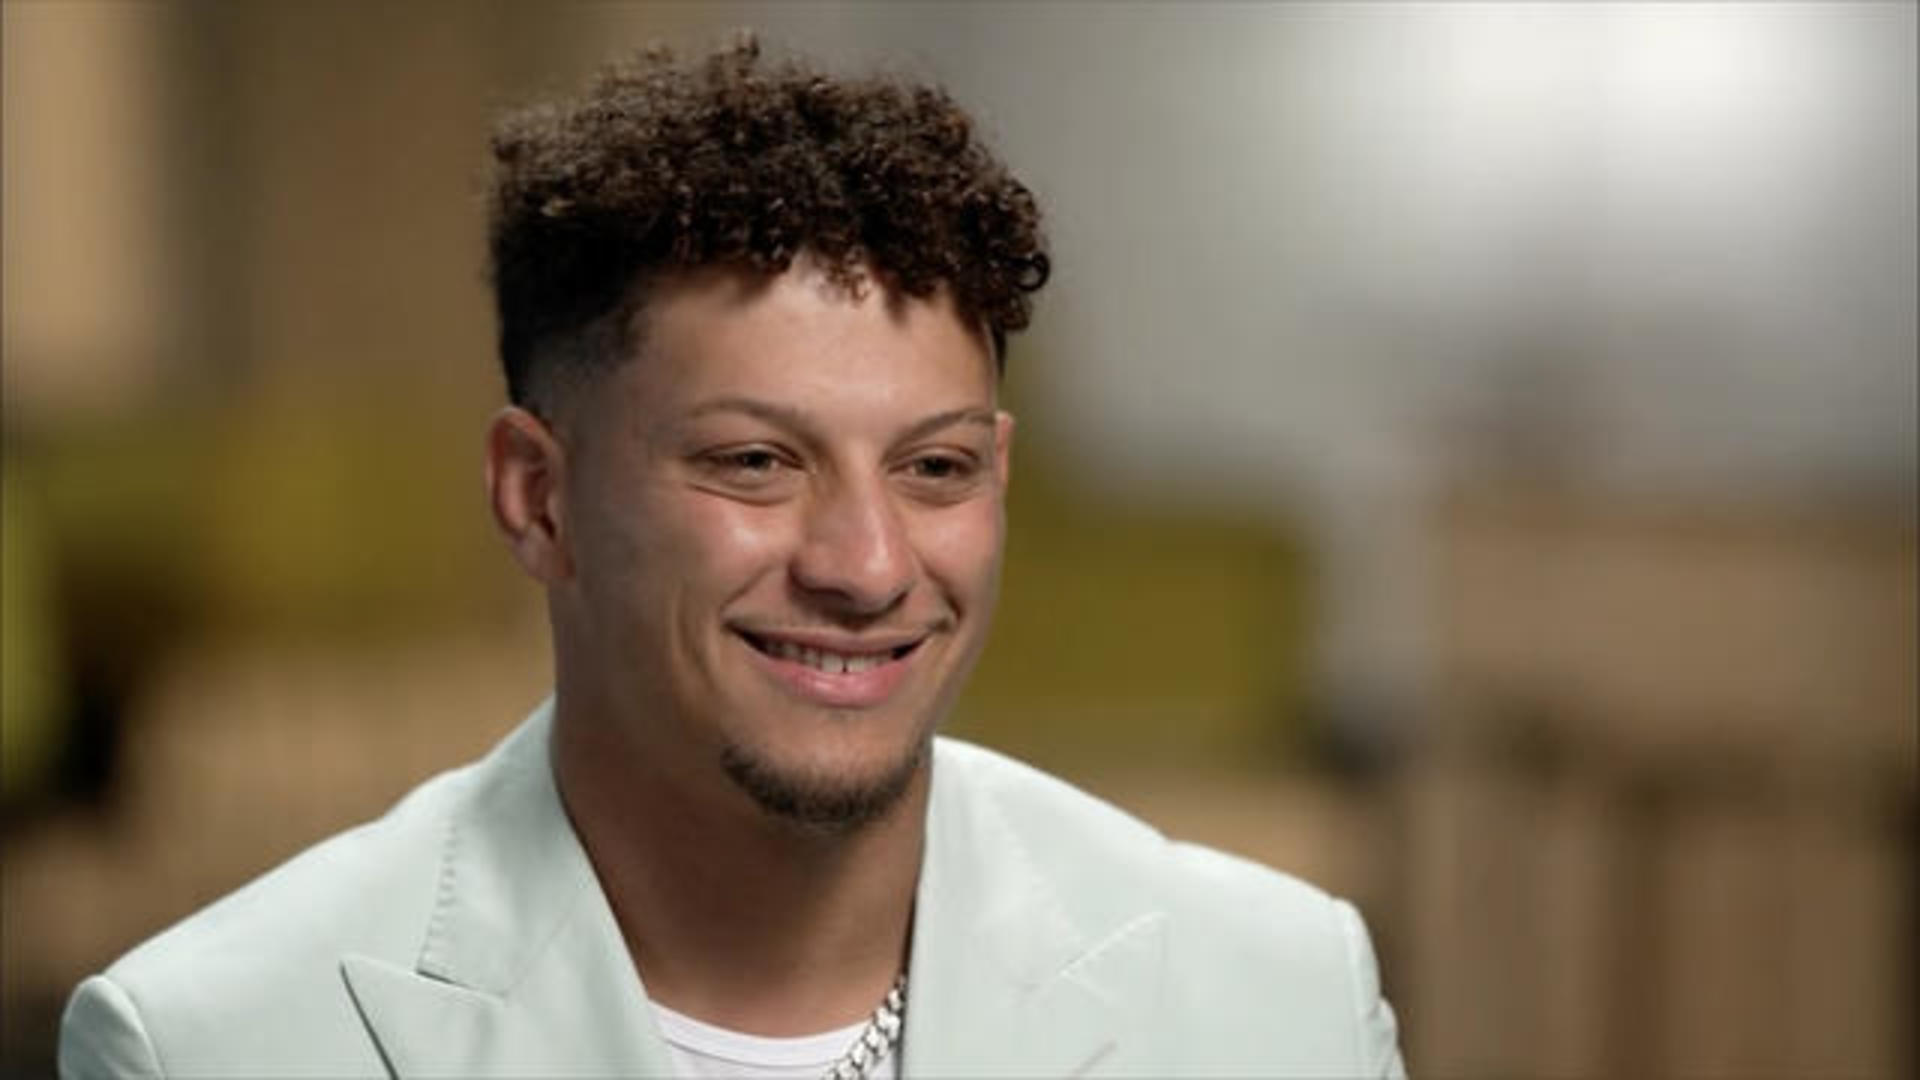 Mahomes Family faces turmoil: Grandmother's health issues and brother's  troubling allegations